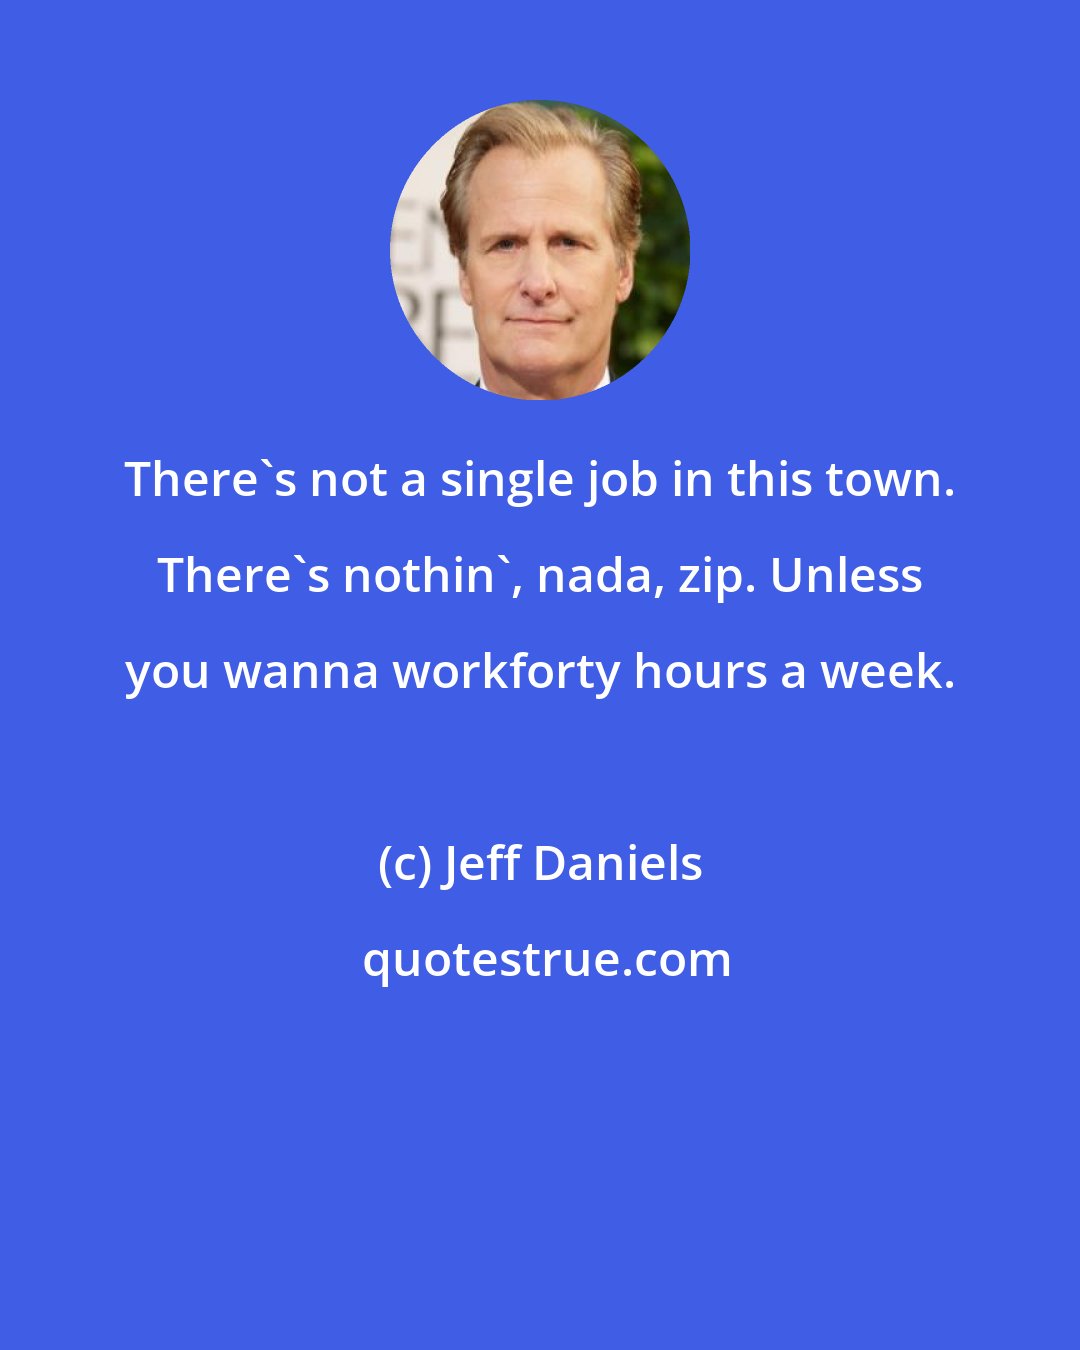 Jeff Daniels: There's not a single job in this town. There's nothin', nada, zip. Unless you wanna workforty hours a week.